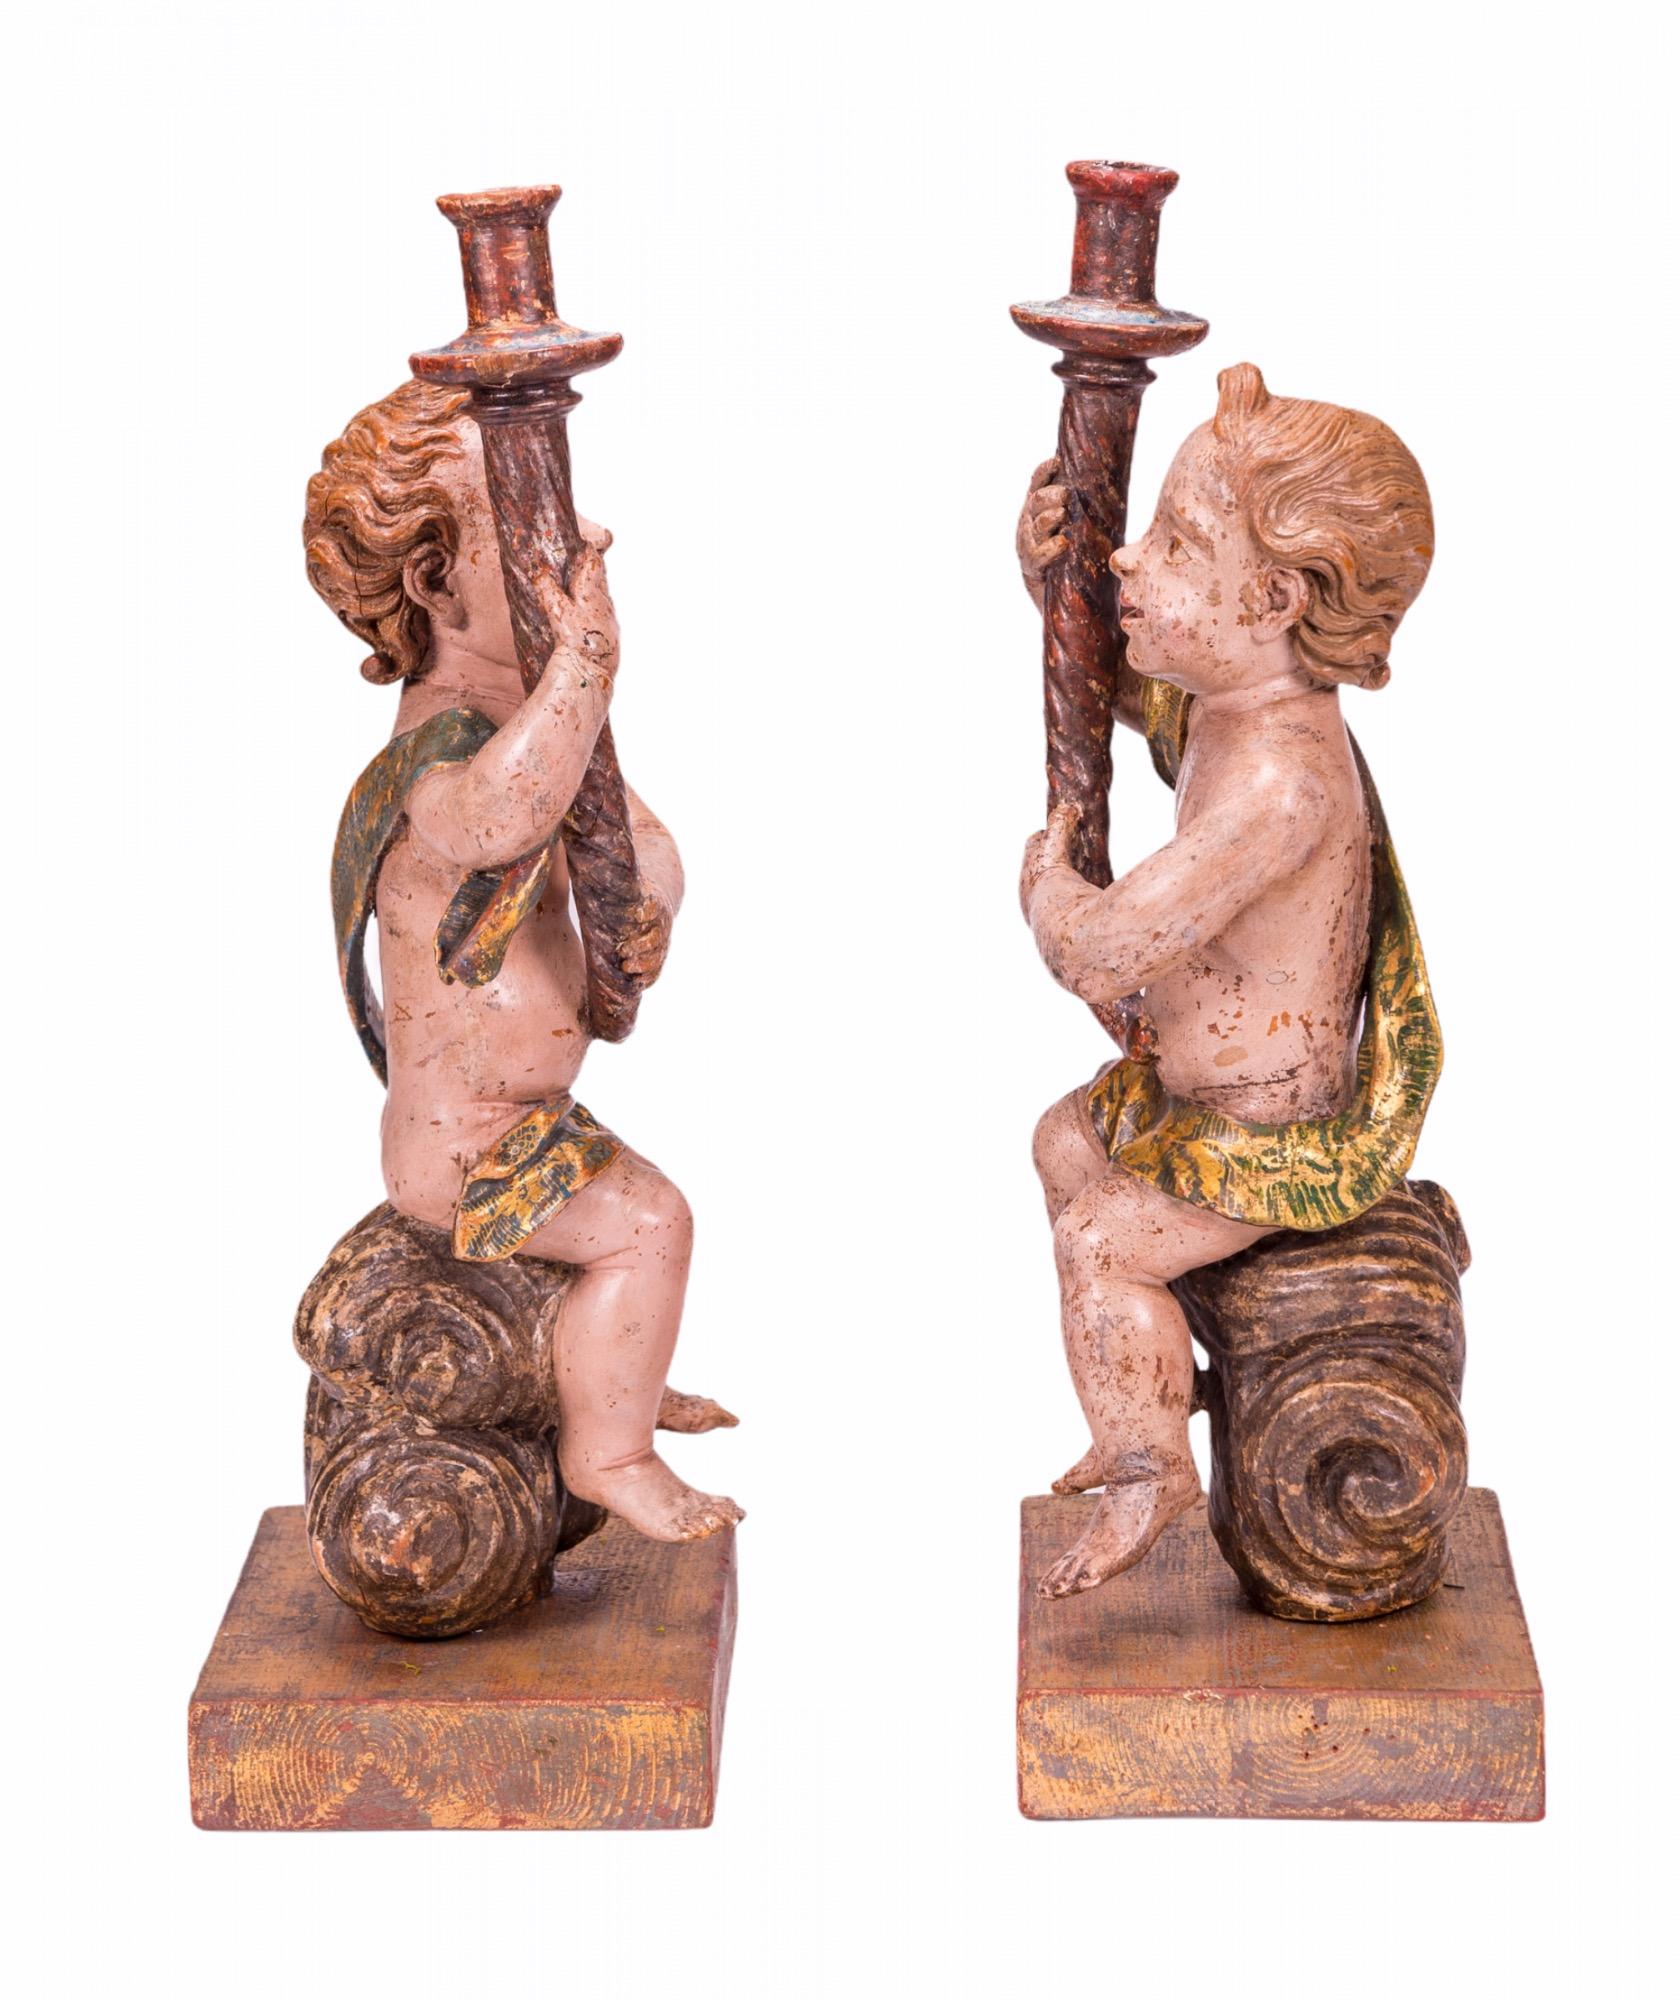 A pair of early 17th Century Baroque polychromed carved wood Angel sculptures with torch shaped candleholders.